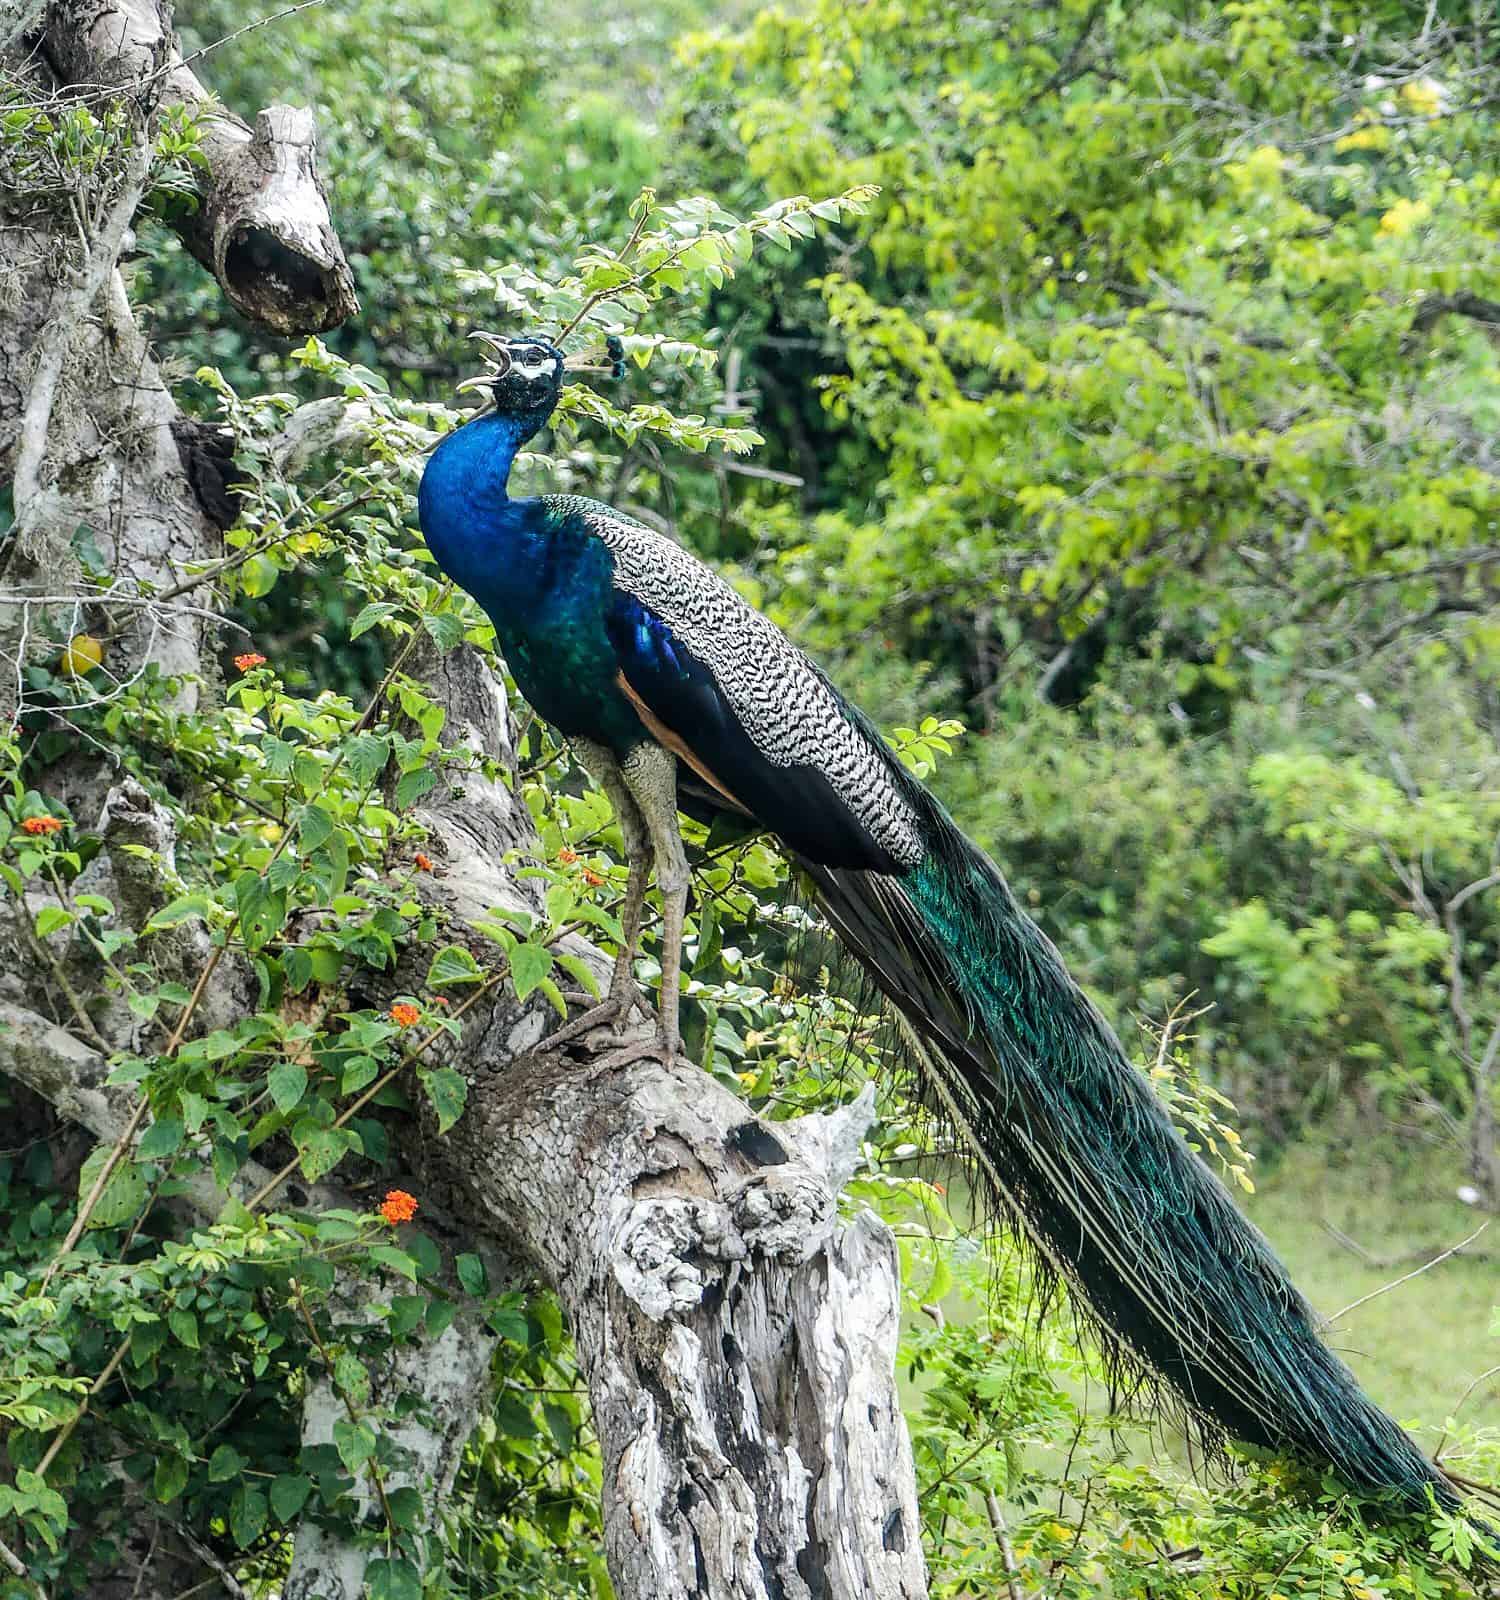 Peacock cawing from its roost in Yala National Park